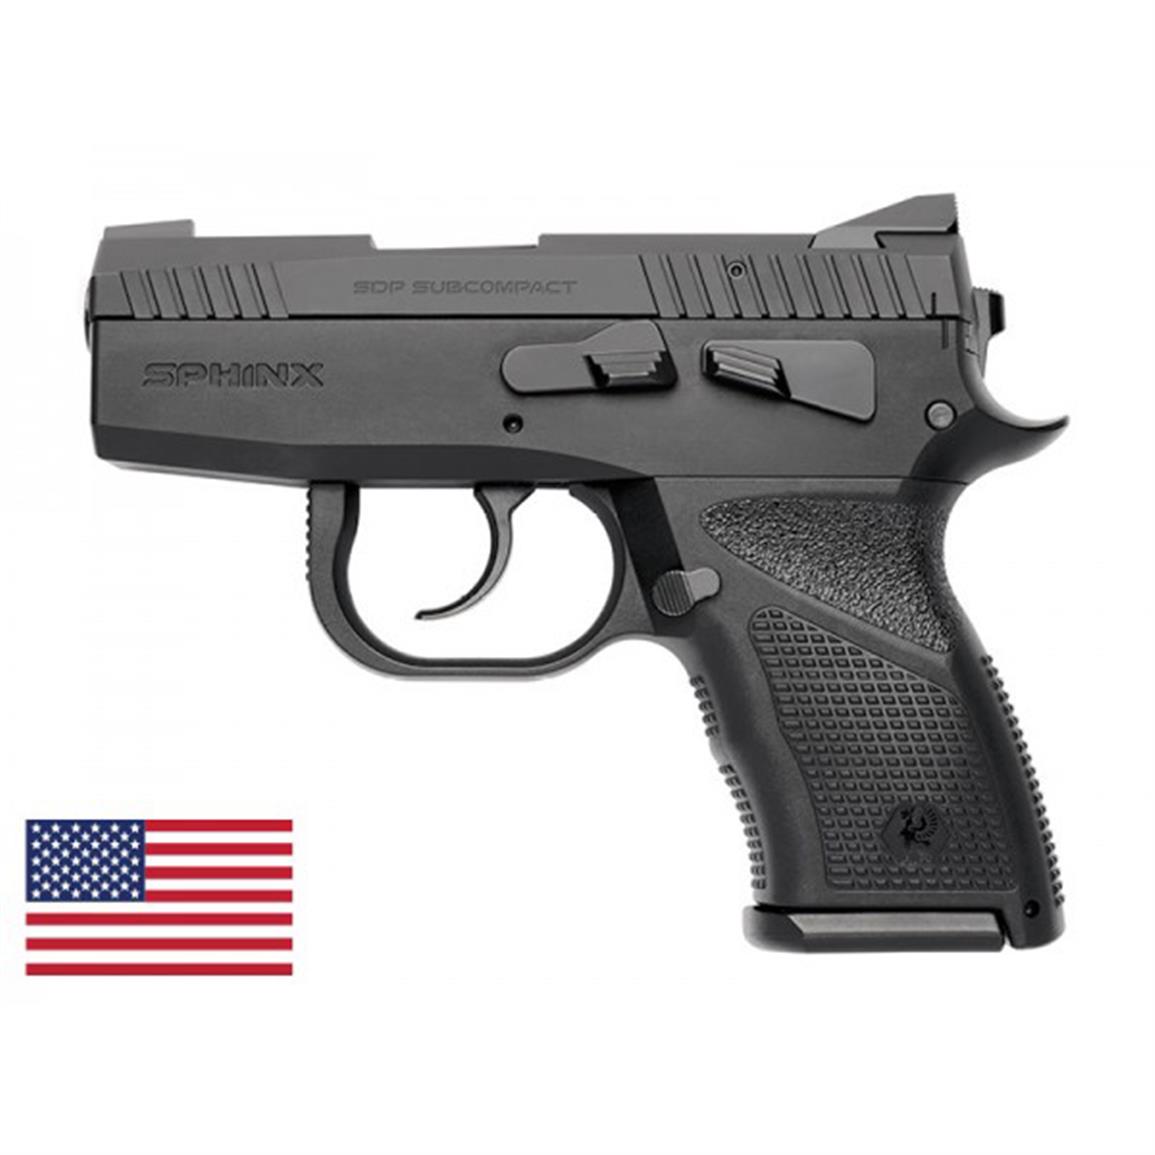 Kriss USA Sphinx SDP Supcompact Alpha, Semi-automatic, 9mm, 13+1 Rounds